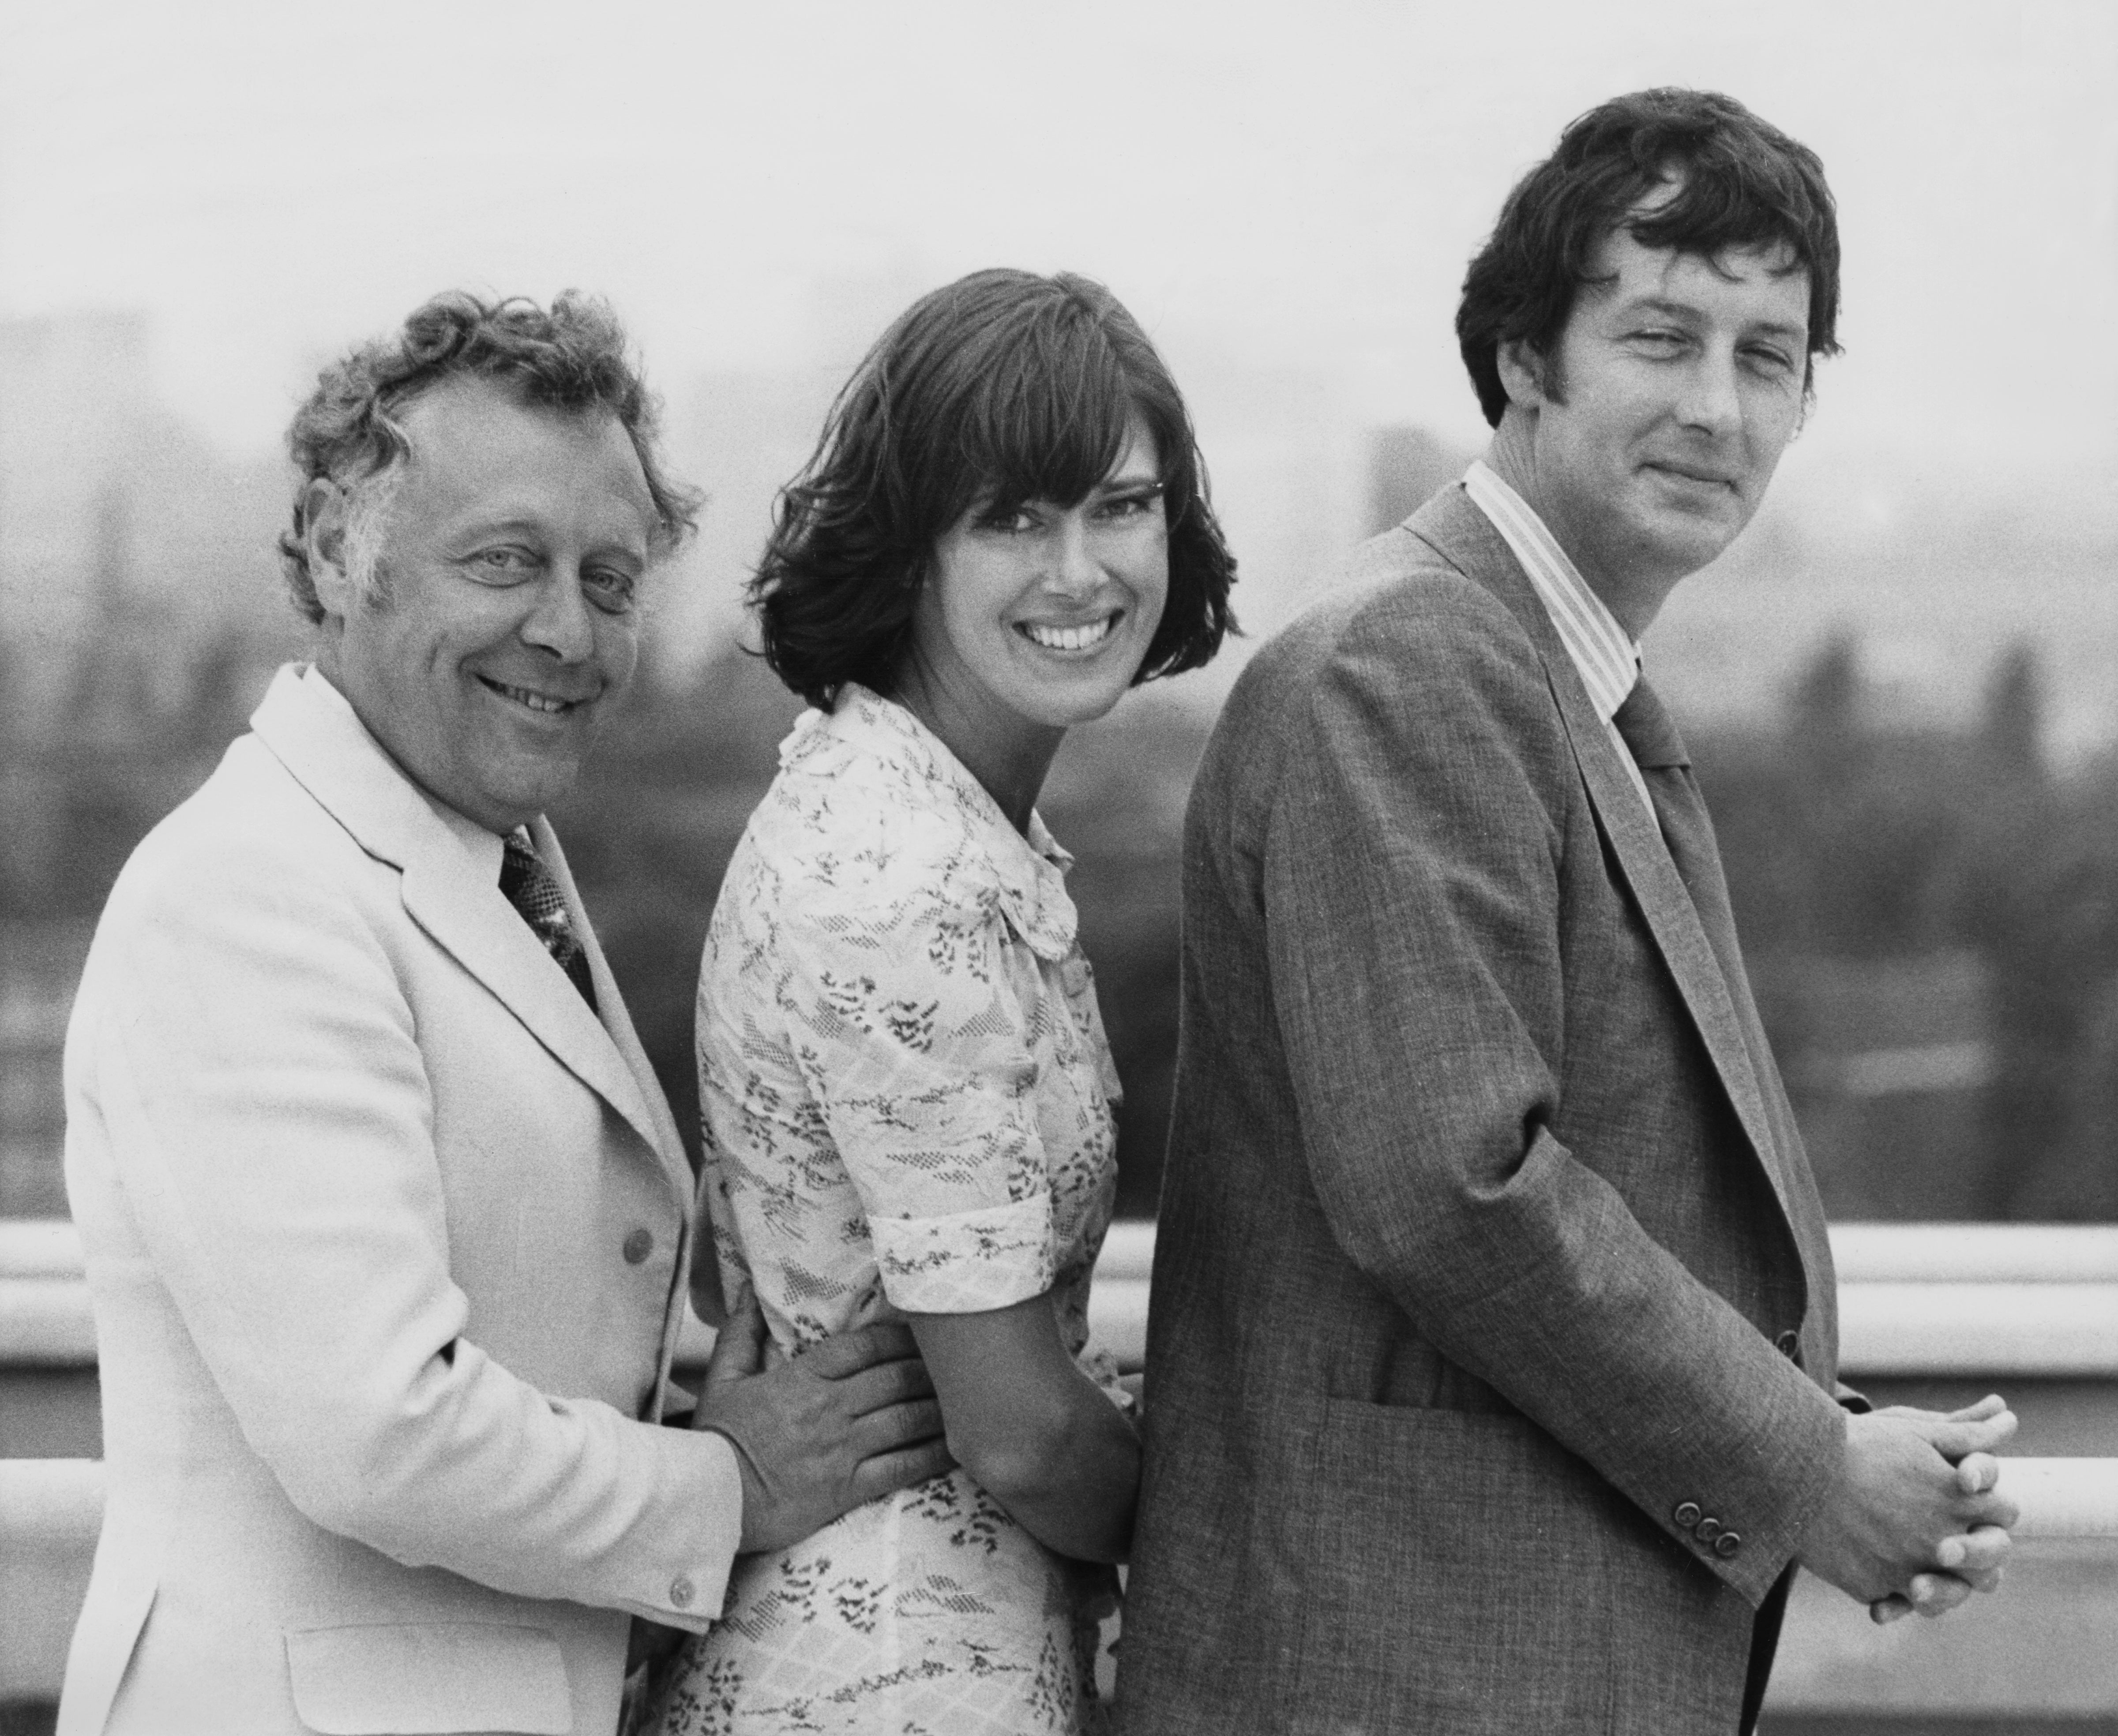 Susan Stranks with Michael Barratt (left) and Bob Wellings (right) on the BBC’s ‘Nationwide’ team in 1974